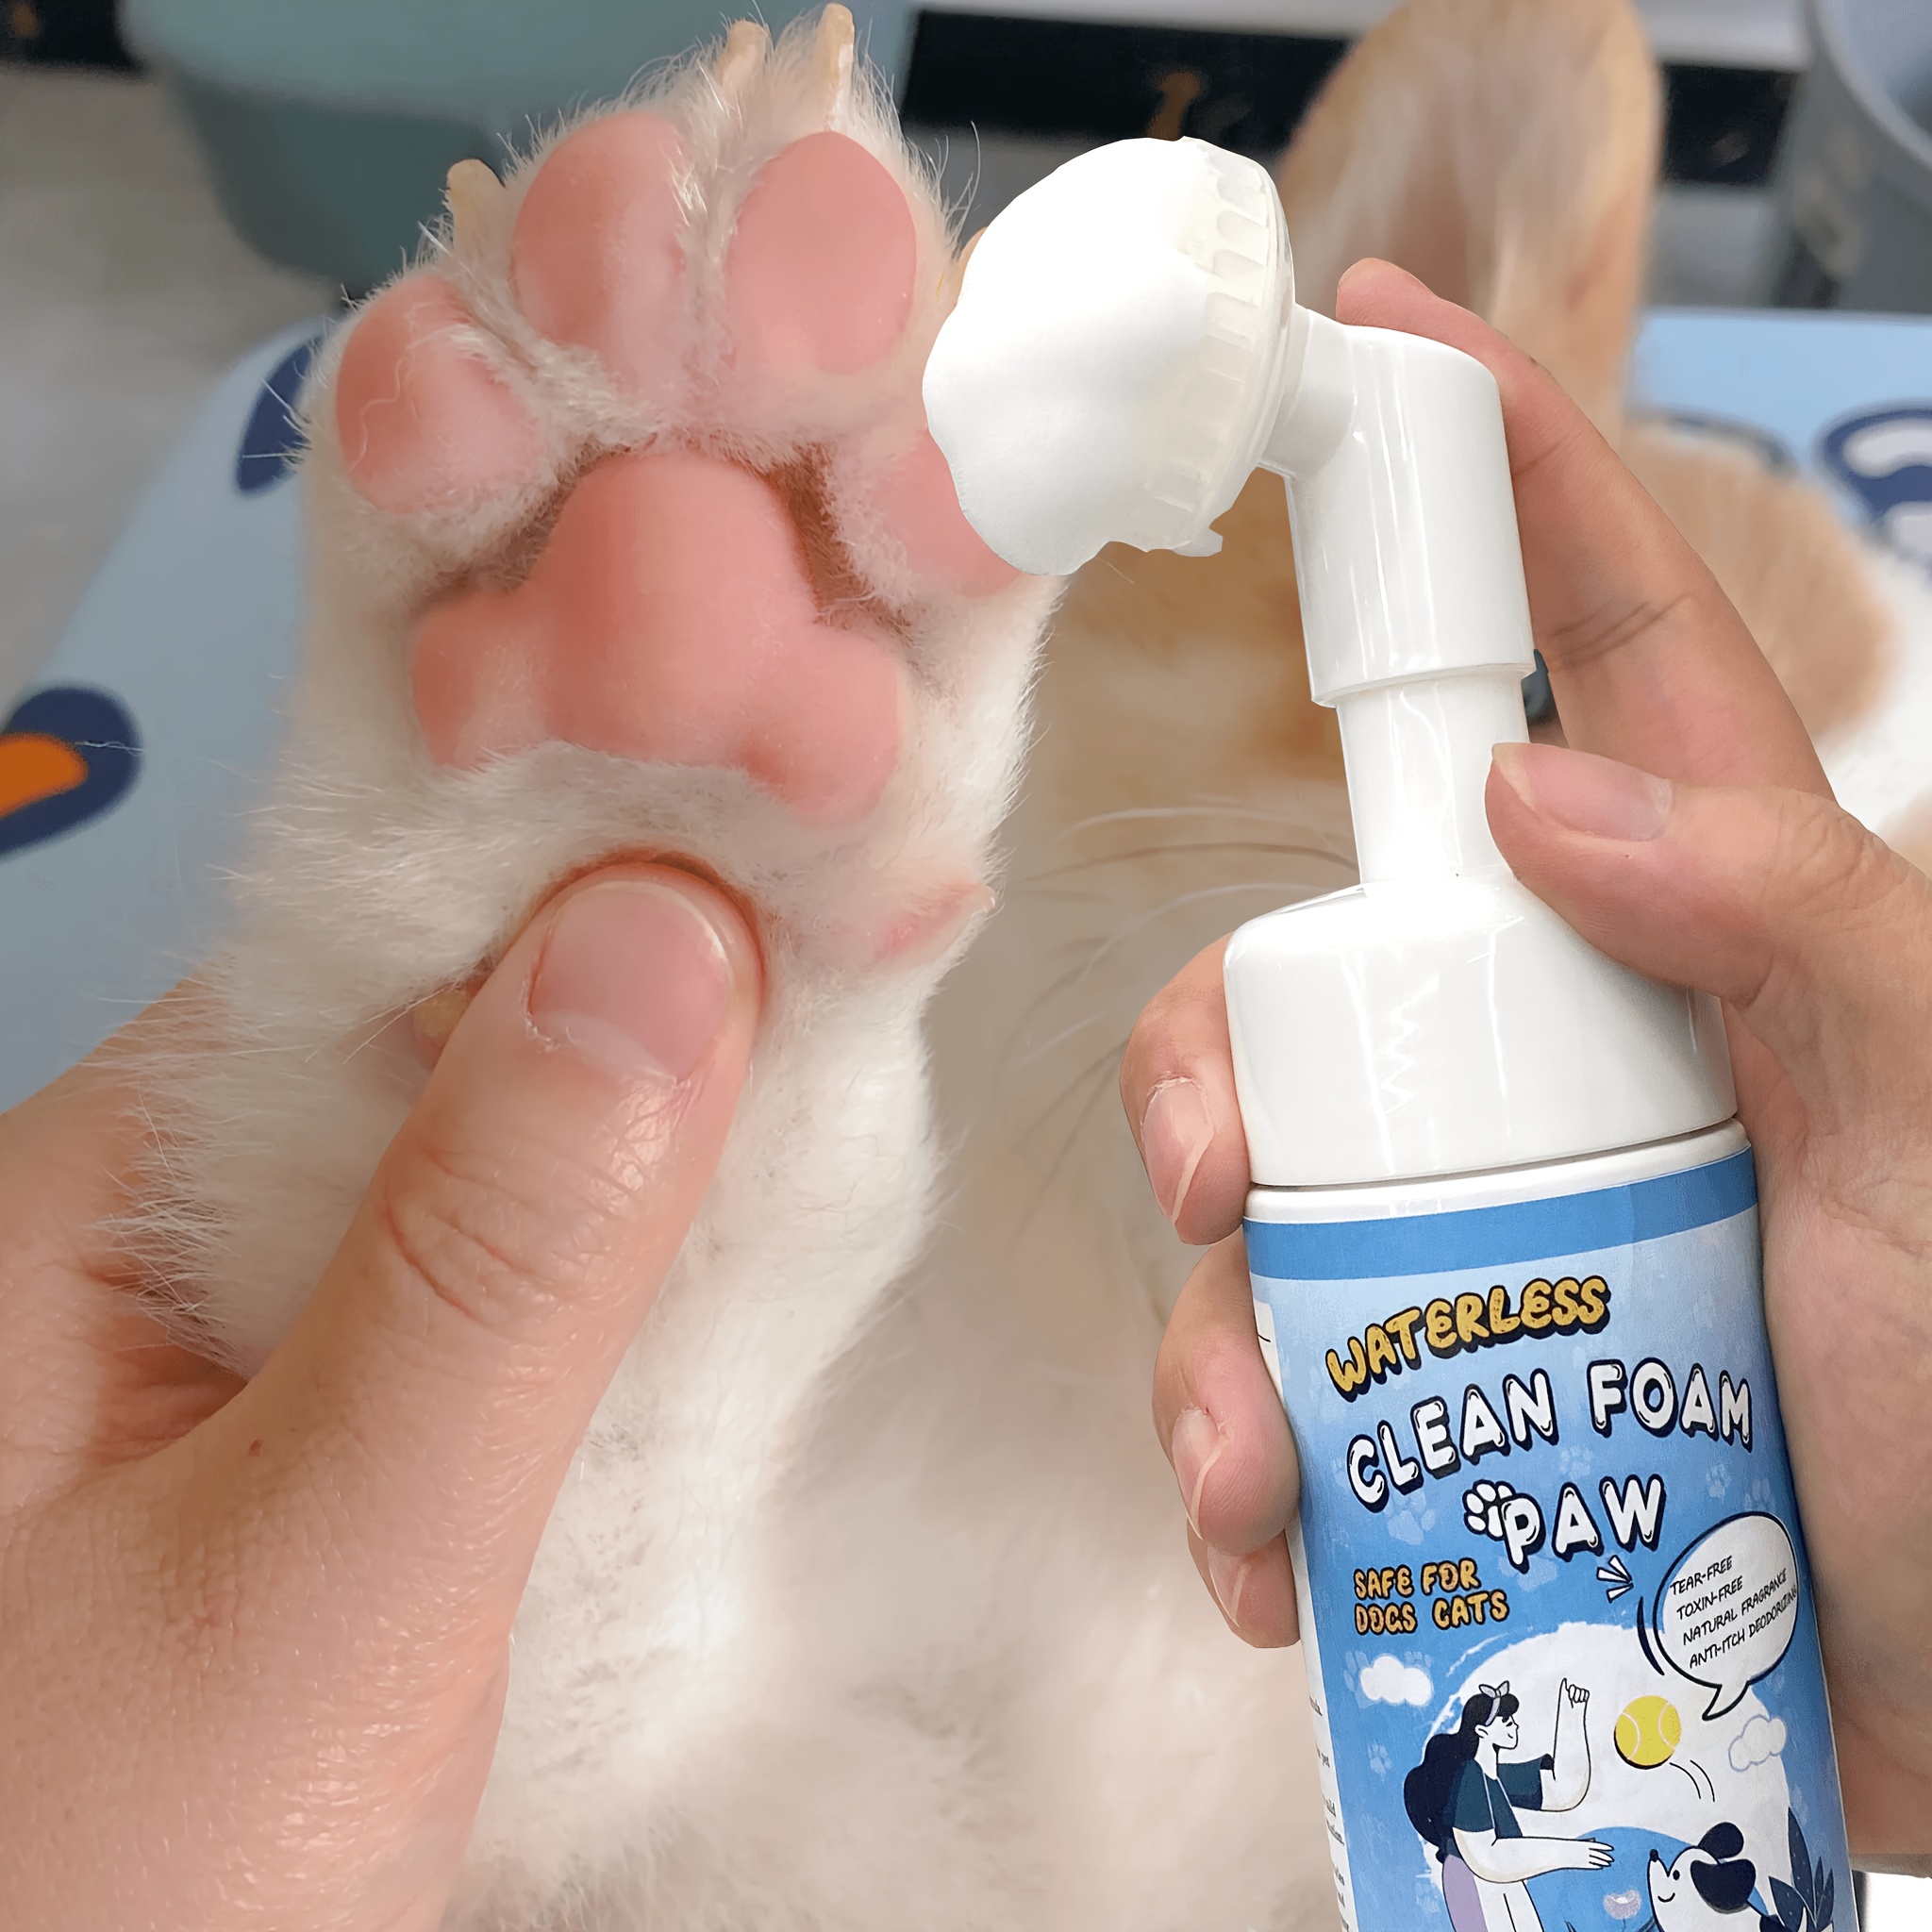 Pet Paw Cleaner Foam Dog Cat Paw Deep Cleaning Foot Pad Care Agent